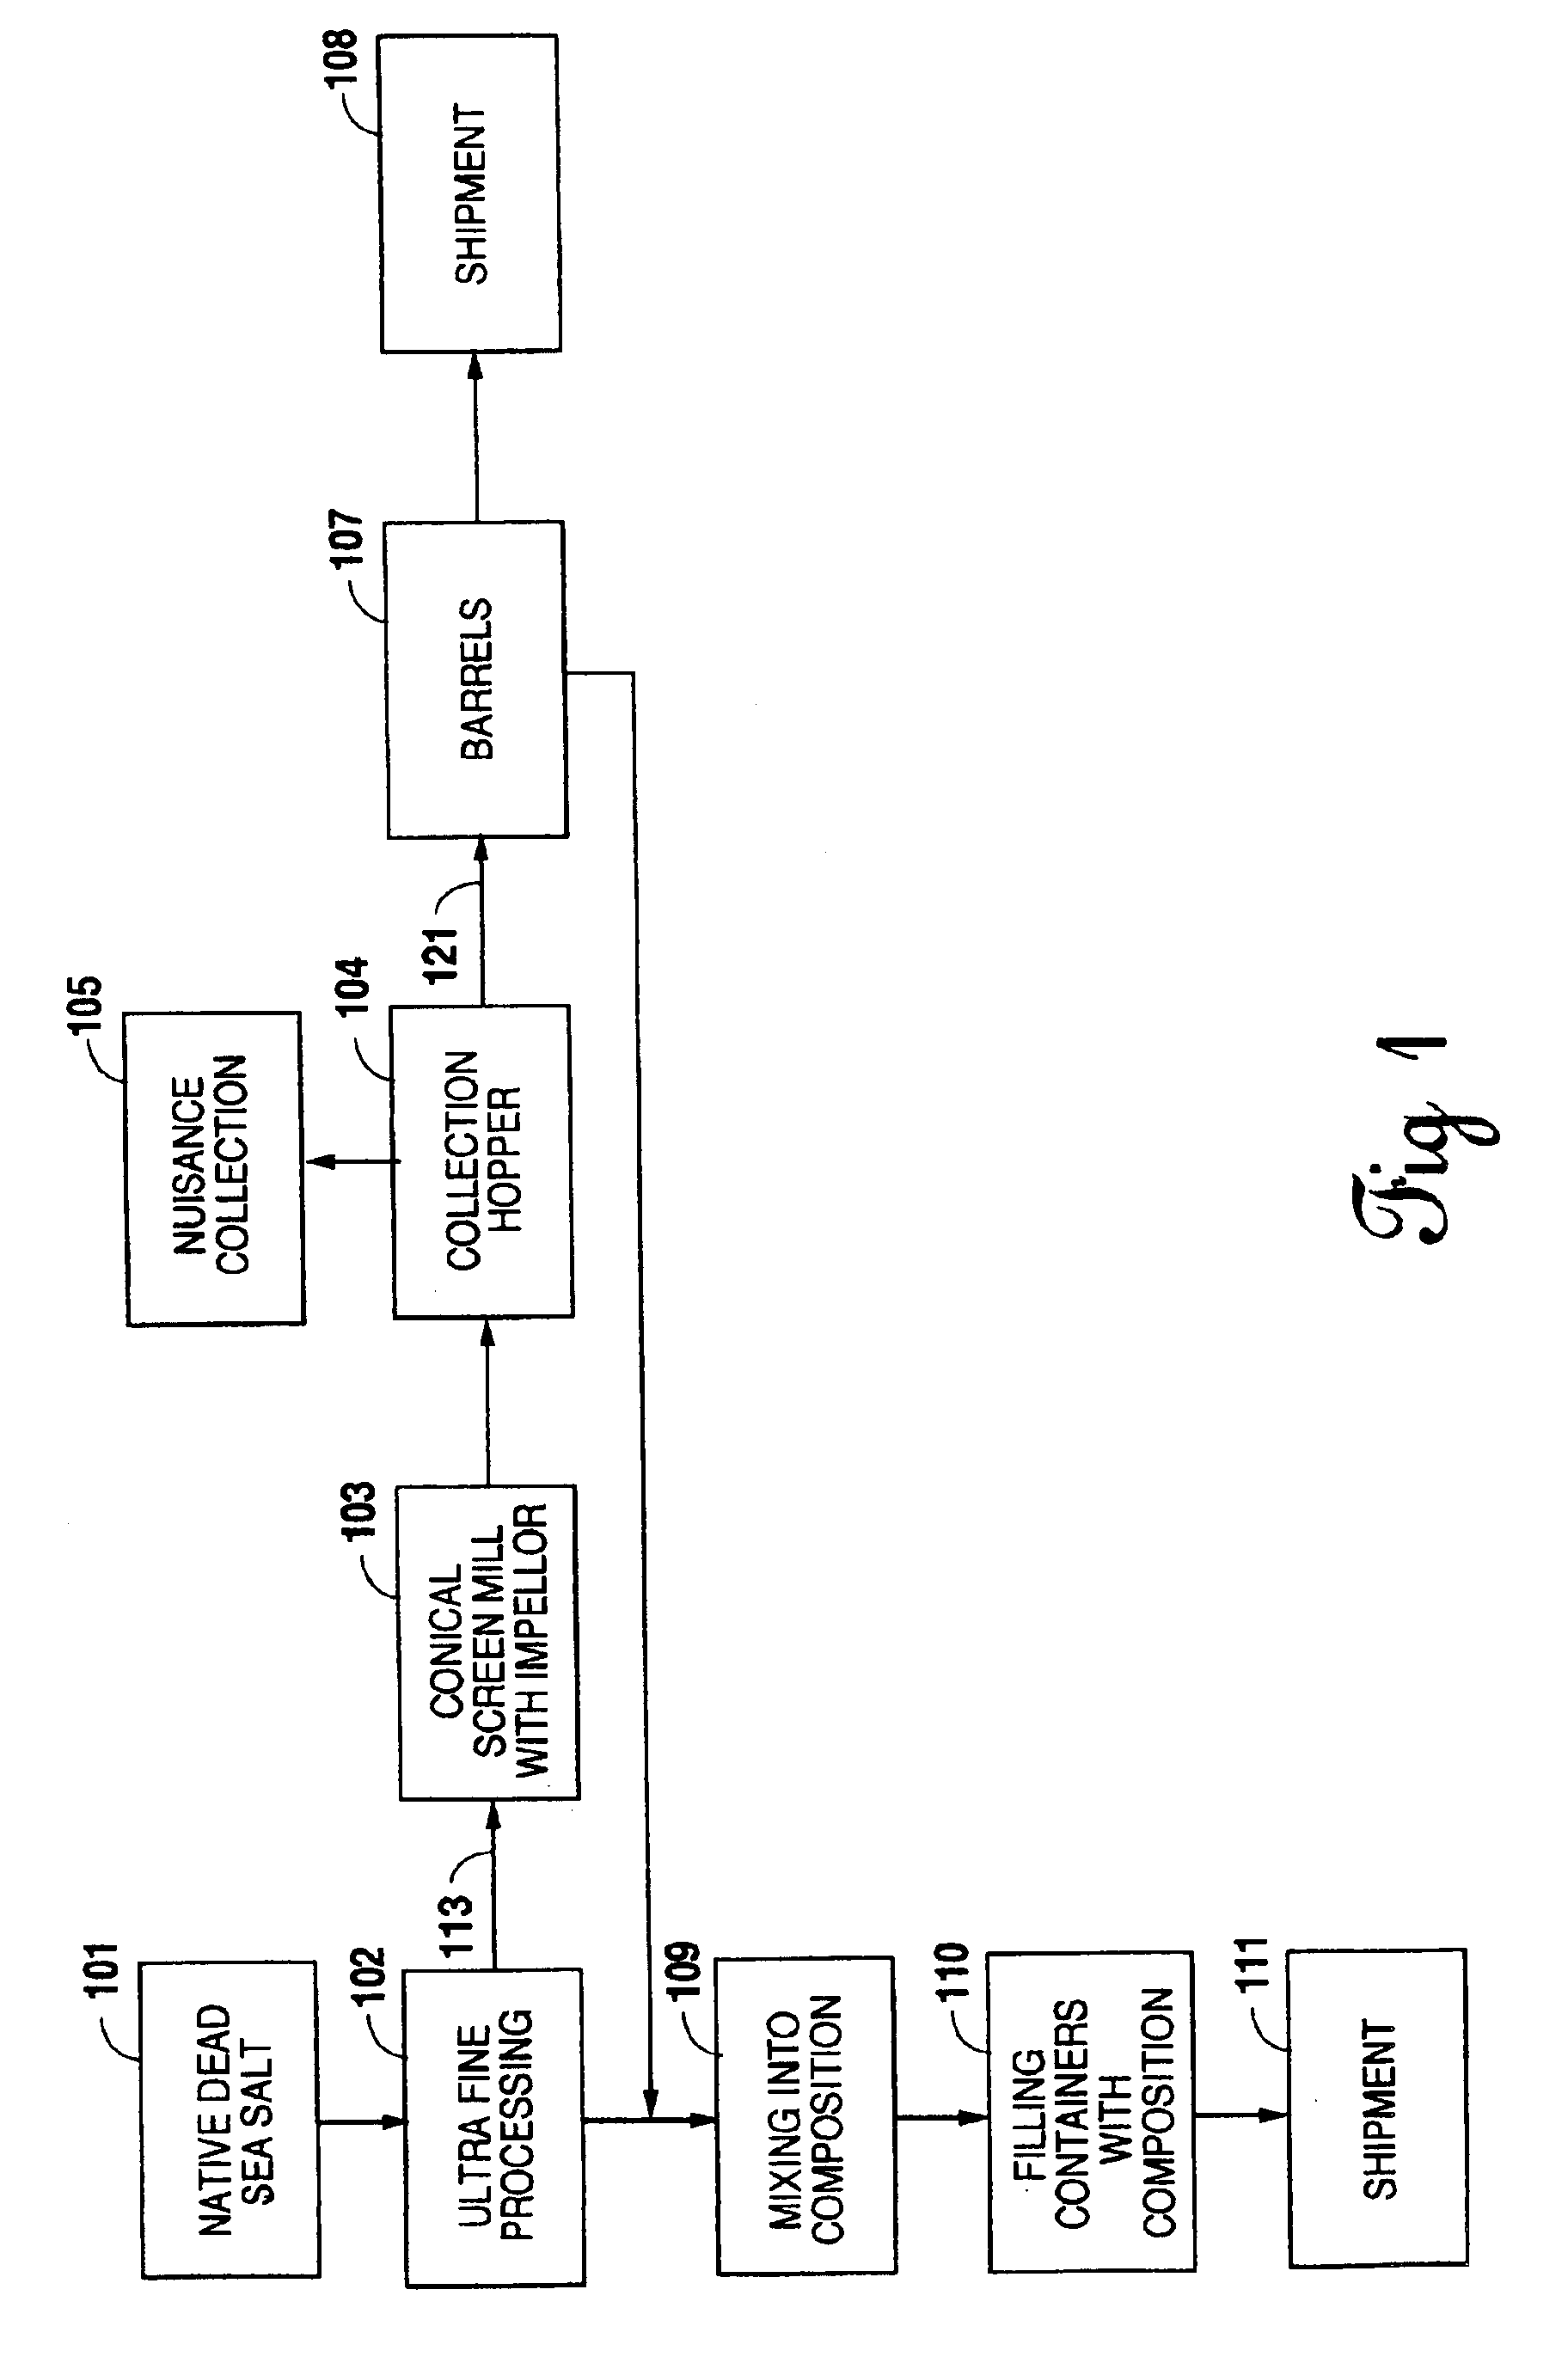 Ultra fine dead sea mineral compound and method of manufacture